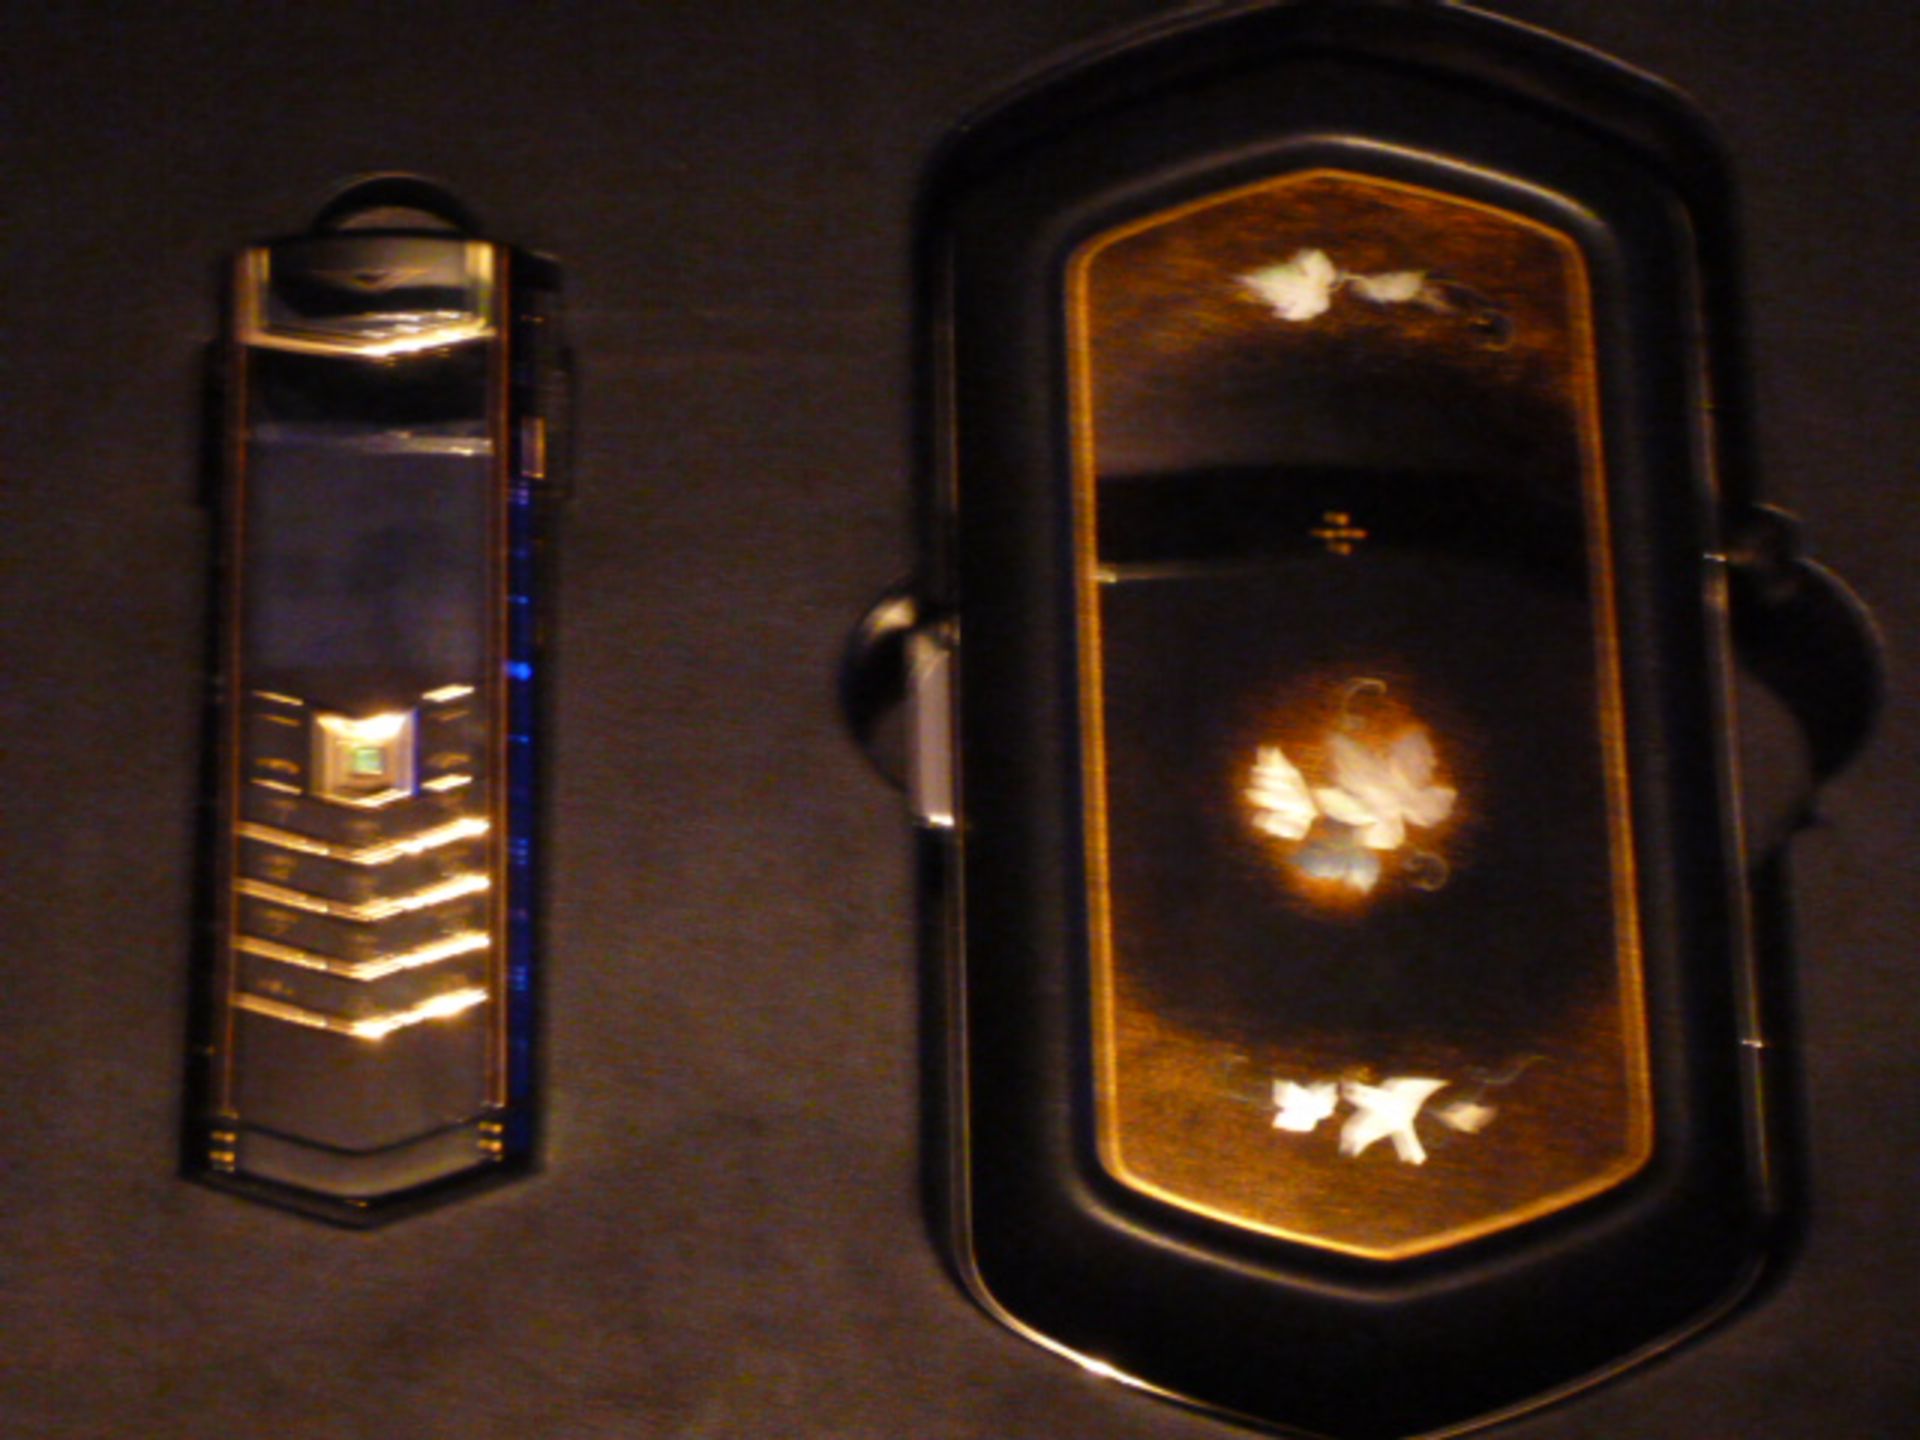 Vertu Signature Harmony Phone, Unique Design 4 of 4. This Handset has been Designed and Created - Image 3 of 8